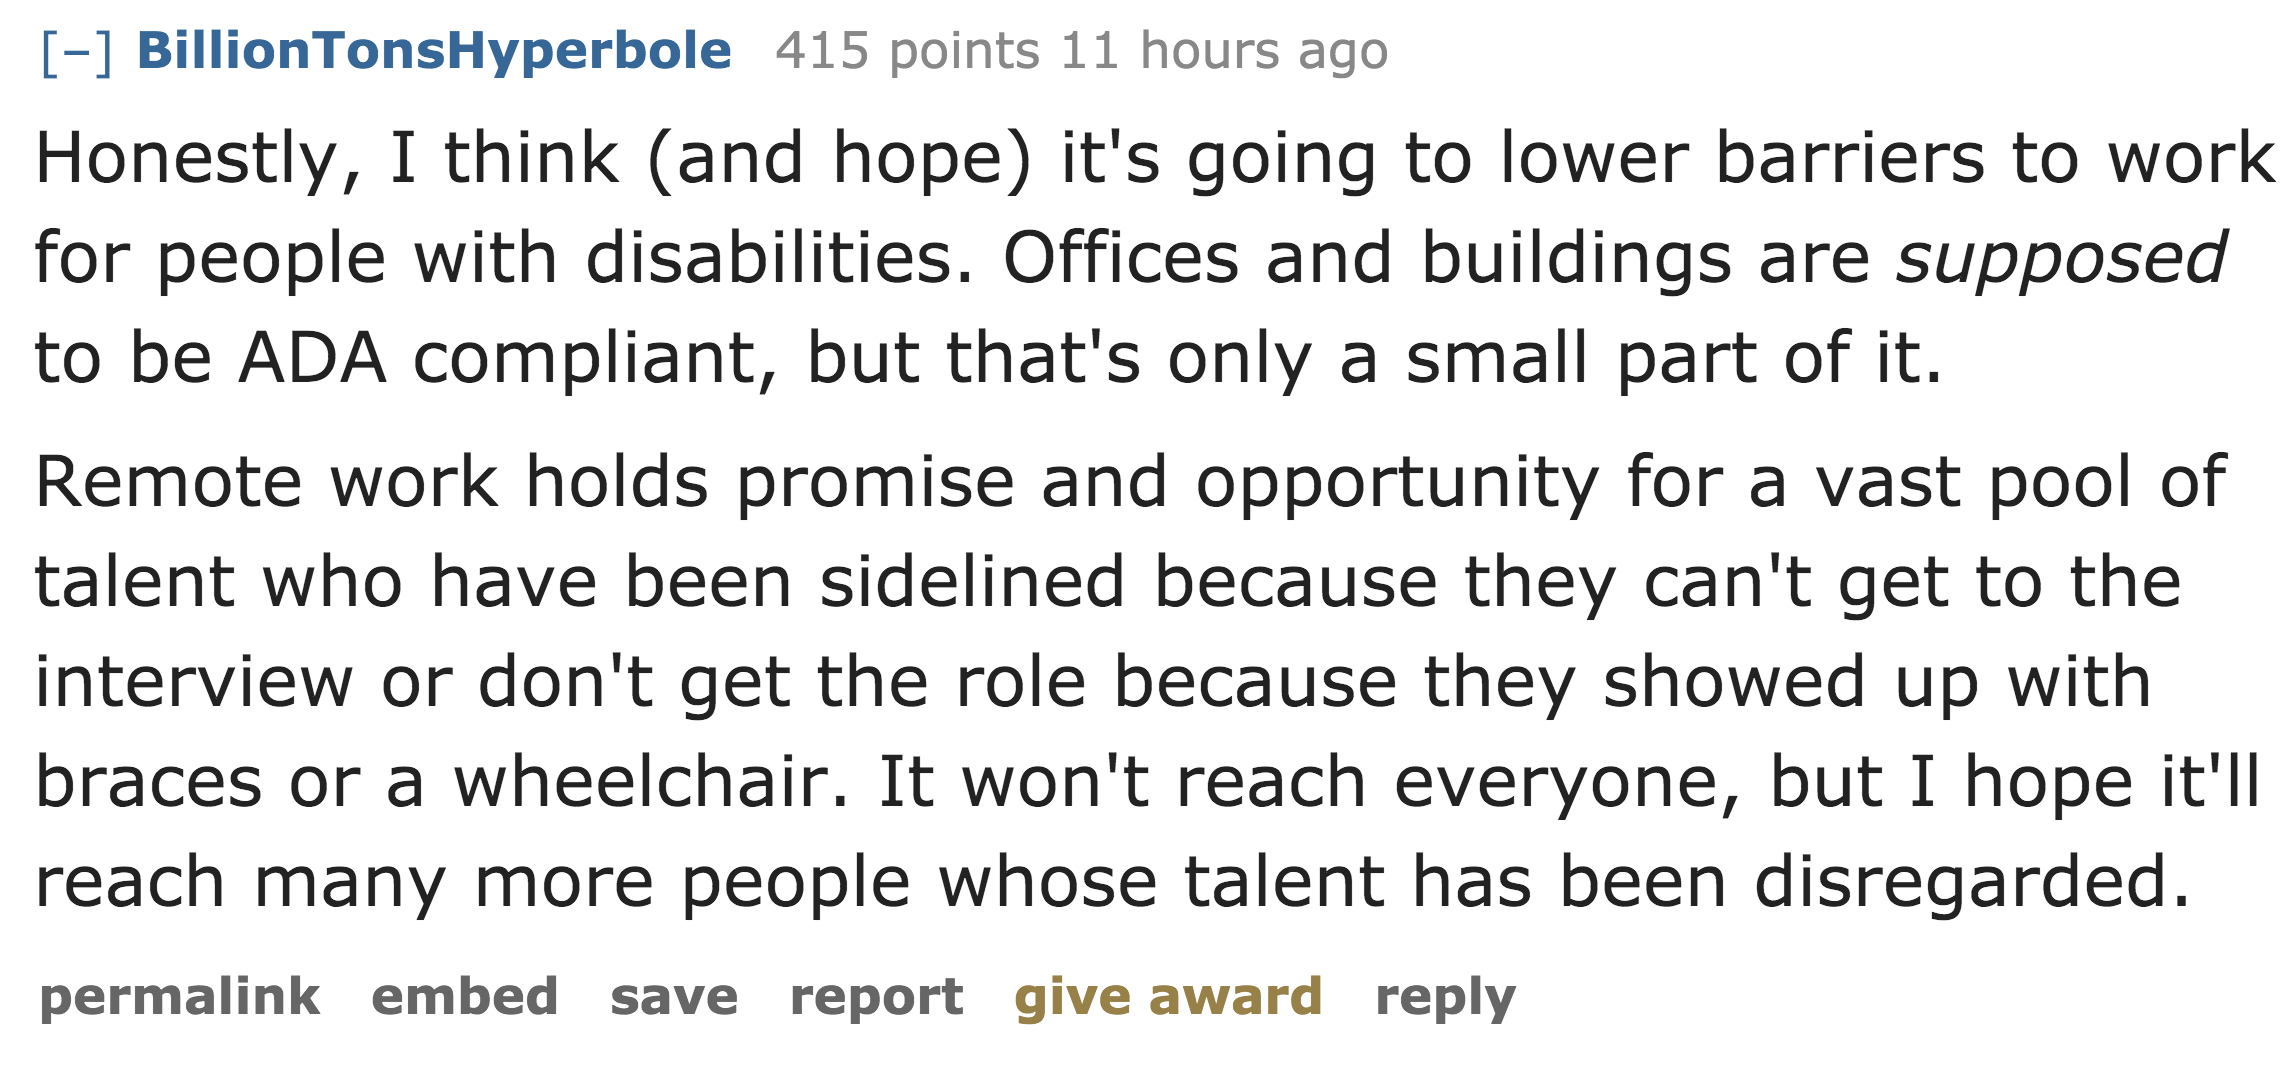 Honestly, I think and hope it's going to lower barriers to work for people with disabilities. Offices and buildings are supposed to be Ada compliant, but that's only a small part of it. Remote work holds promis